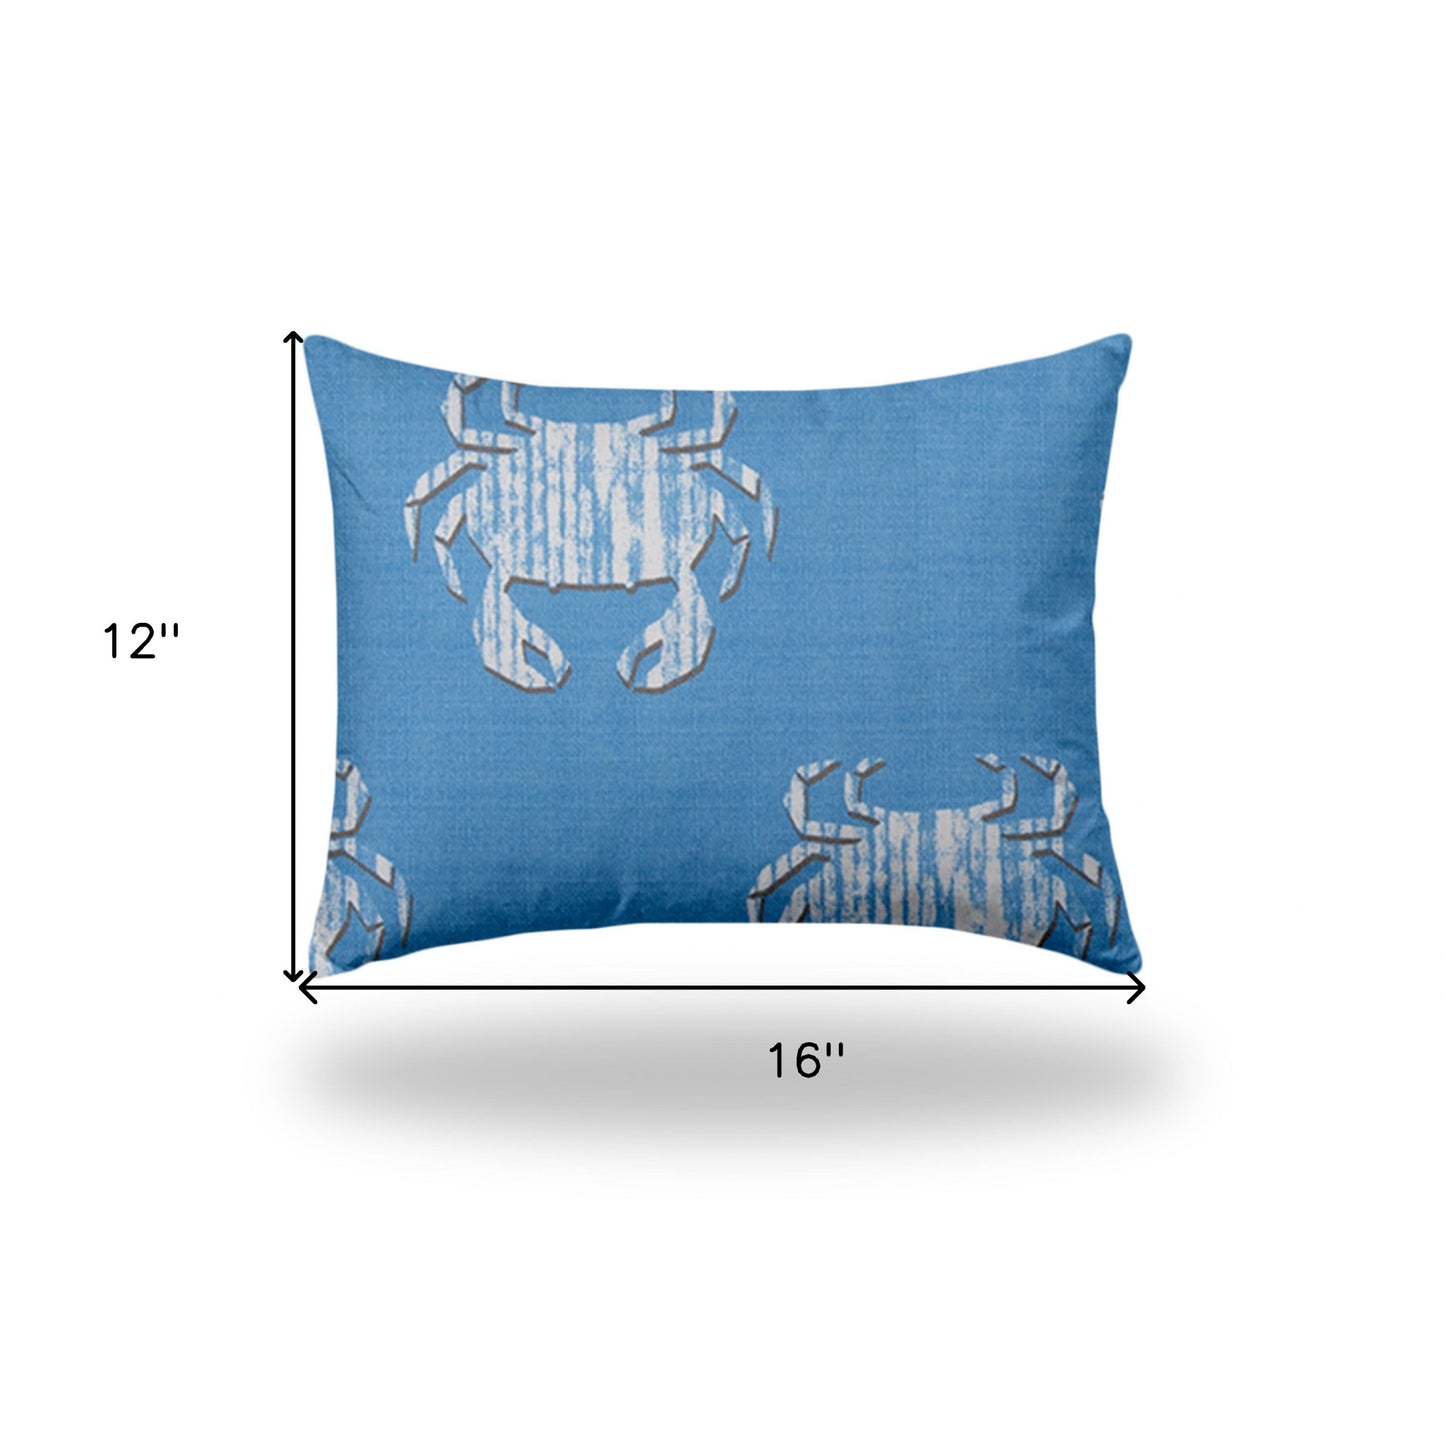 12" X 16" Blue And White Crab Zippered Lumbar Indoor Outdoor Pillow Cover